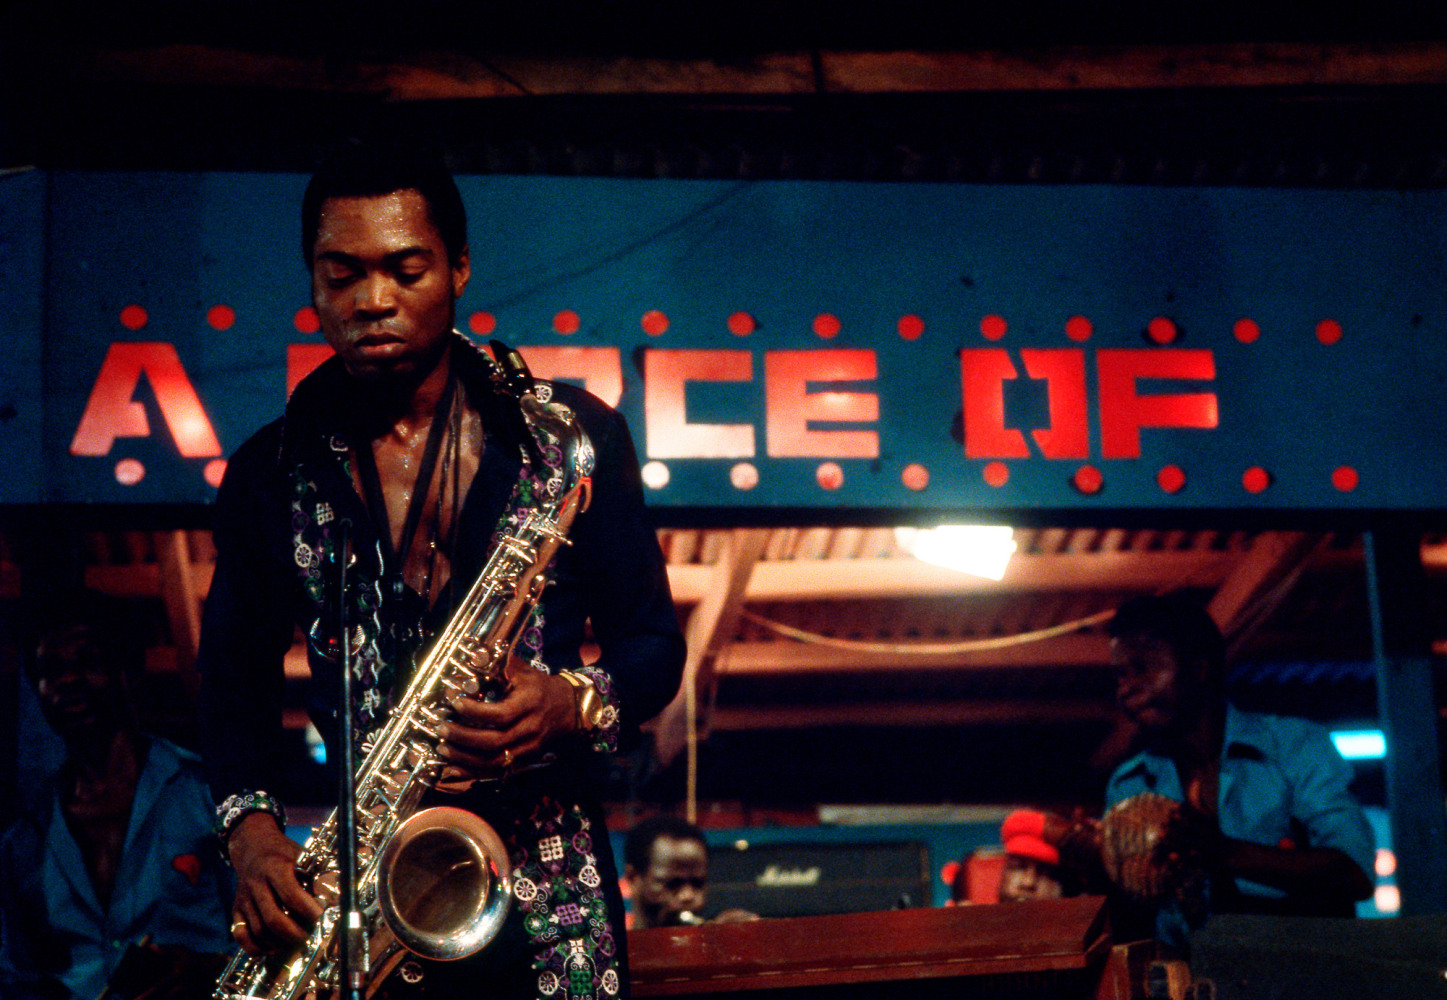 Roy Lewis (b. 1937)
Fela and his Sax at his Shrine Nightclub, 1977
Archival inkjet print on Simply Elegant Gold Fibre paper
Image: 13 3/4 x 20 inches (34.9 x 50.8 cm) Sheet: 17 x 22 inches (43.2 x 55.9 cm)
Framed: 18 5/8 &amp;times; 25 3/8 &amp;times; 1 1/2 inches (47.3 &amp;times; 64.5 &amp;times; 3.8 cm)
Edition of 5, printed 2023